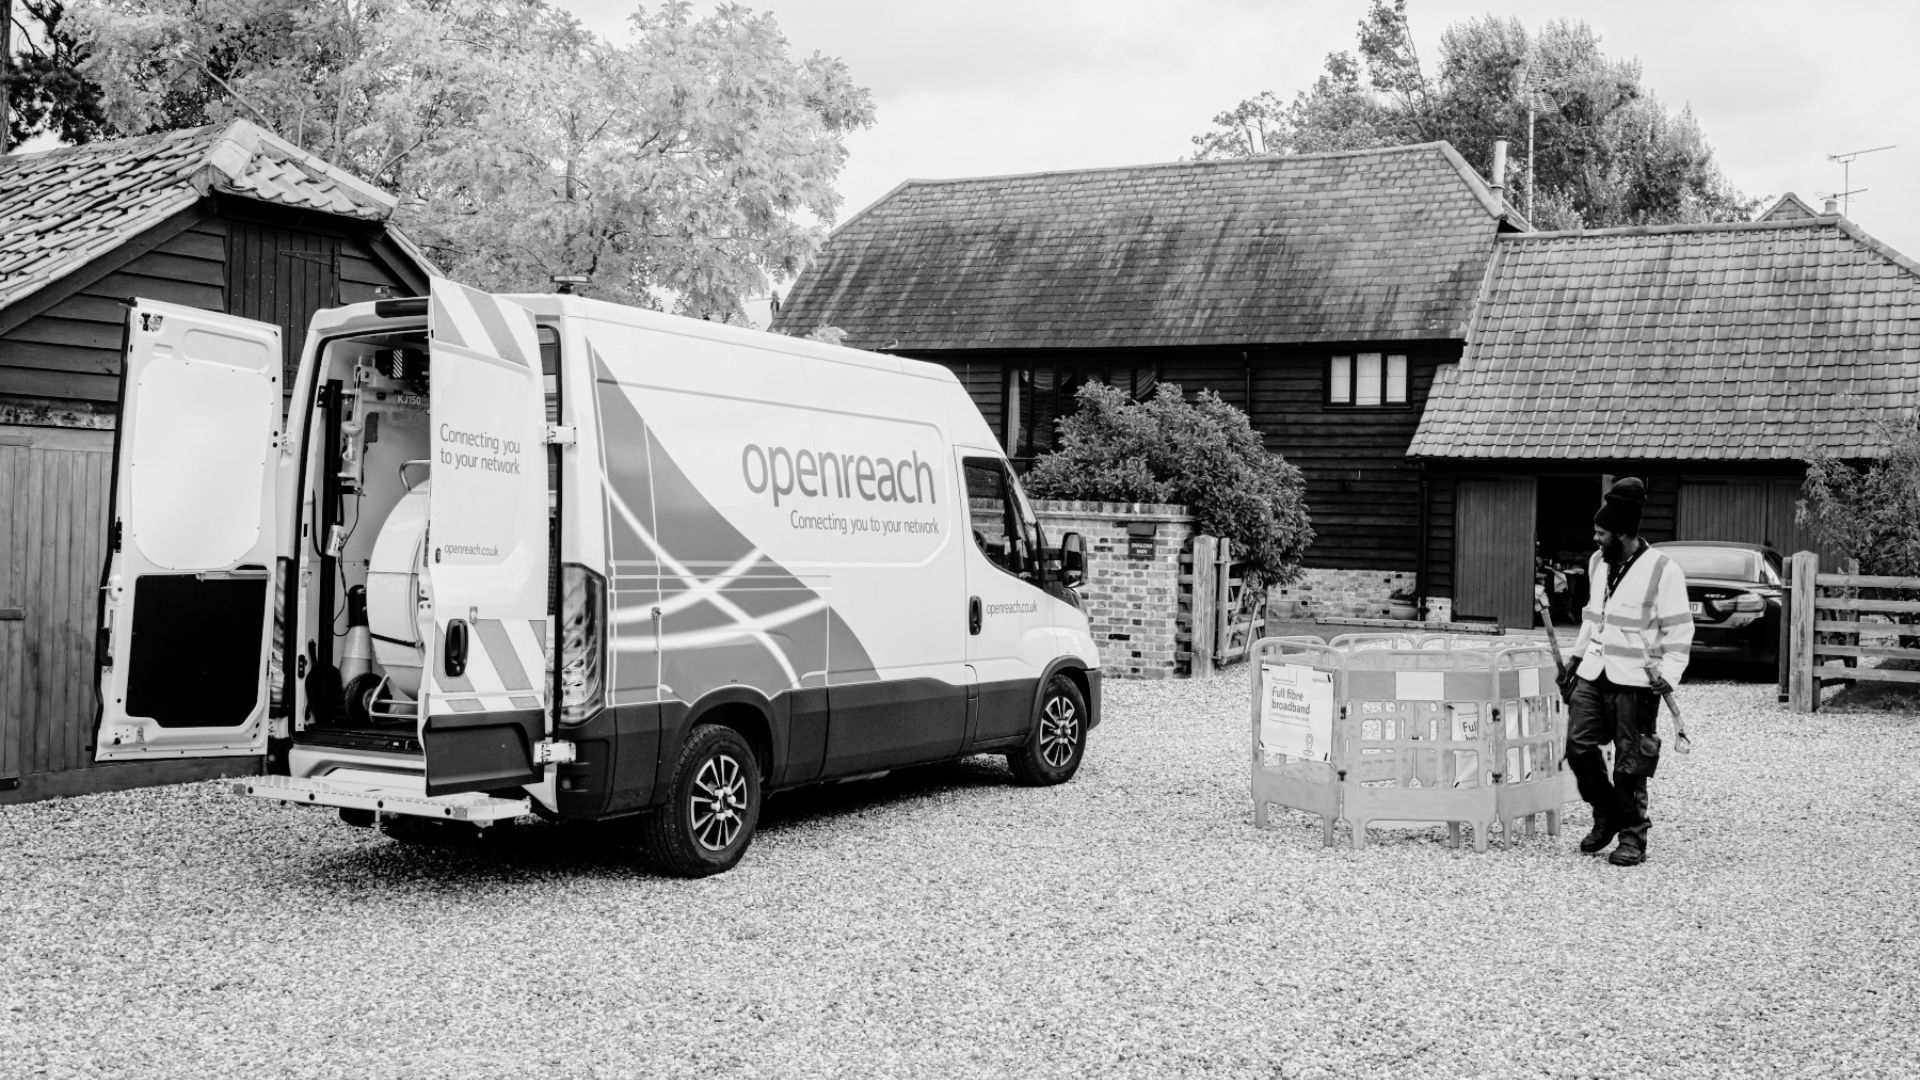 Bobbington Residents Now Have Choice to Opt for Openreach’s Ultrafast Broadband